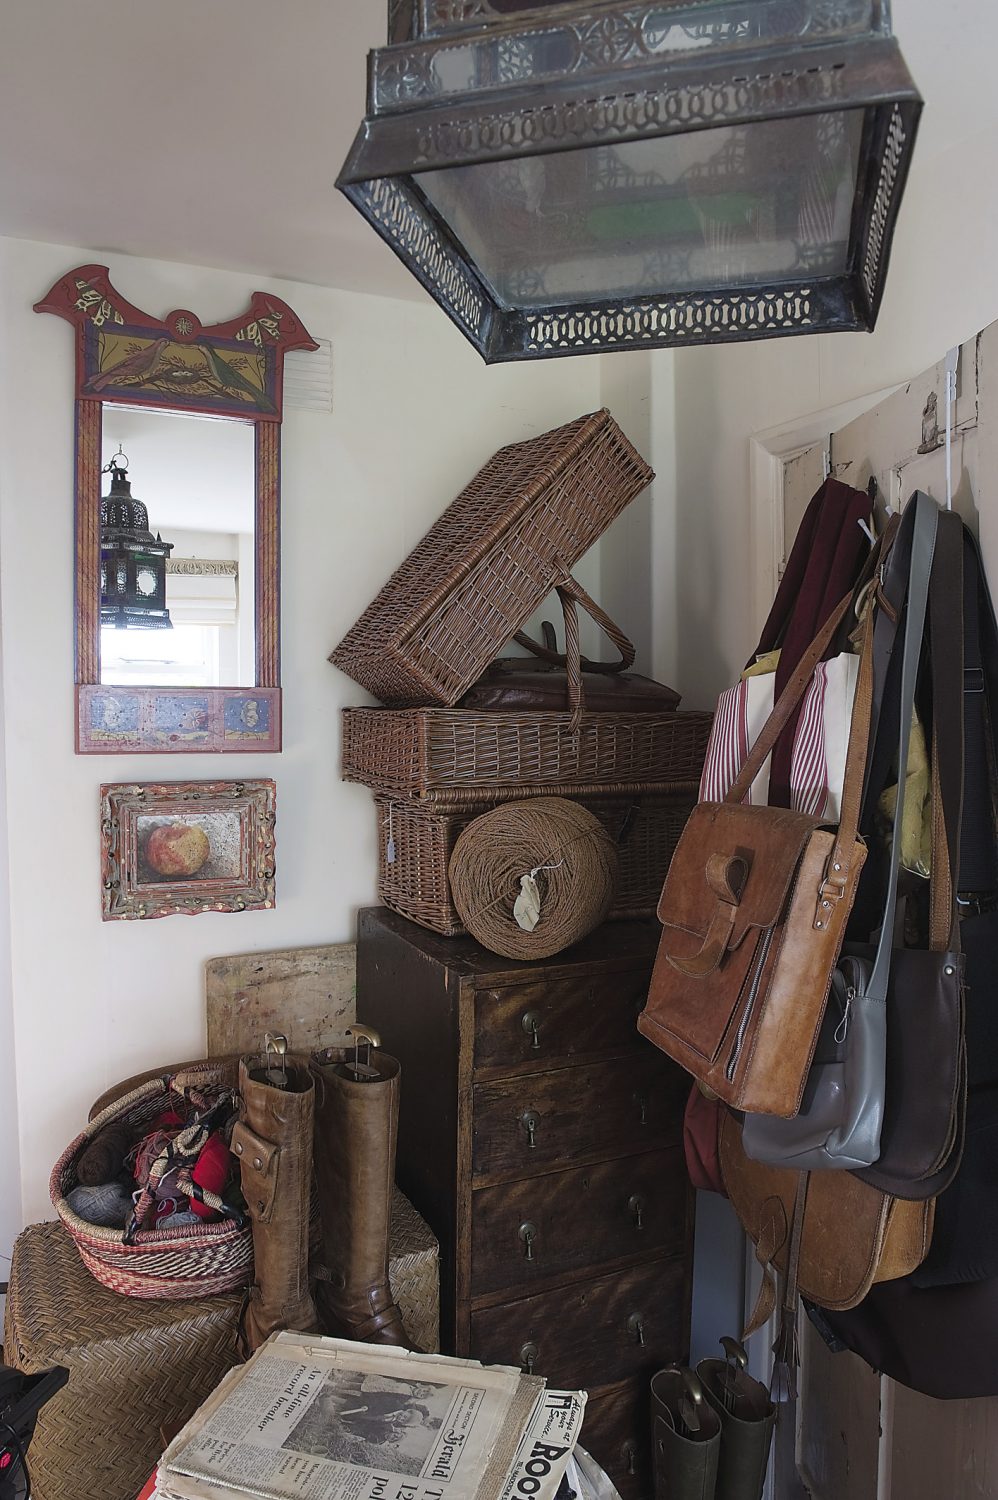 The spare room is currently filled with fascinating curios: furniture, leather bags, wool, old newspapers, postcards and even a taxidermy cockatoo